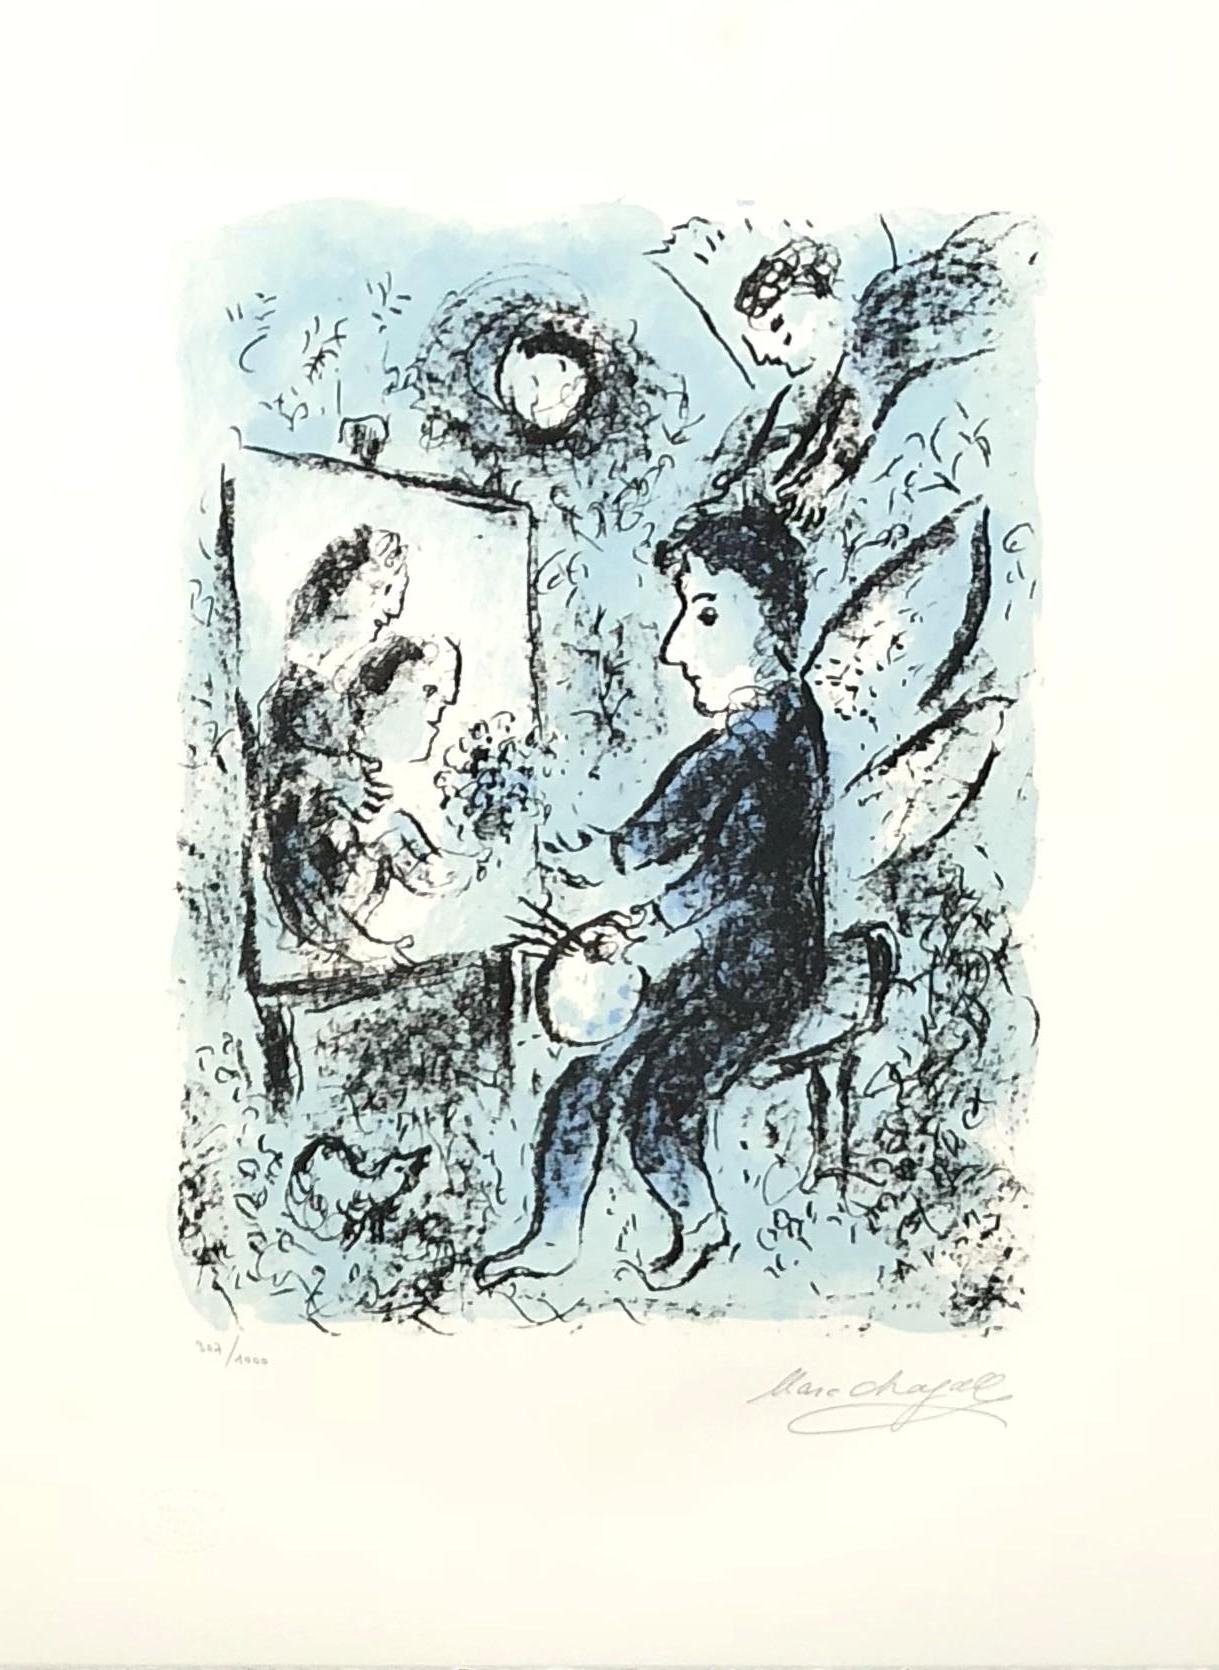 Marc Chagall Figurative Print - Towards Another Light - Original Lithograph